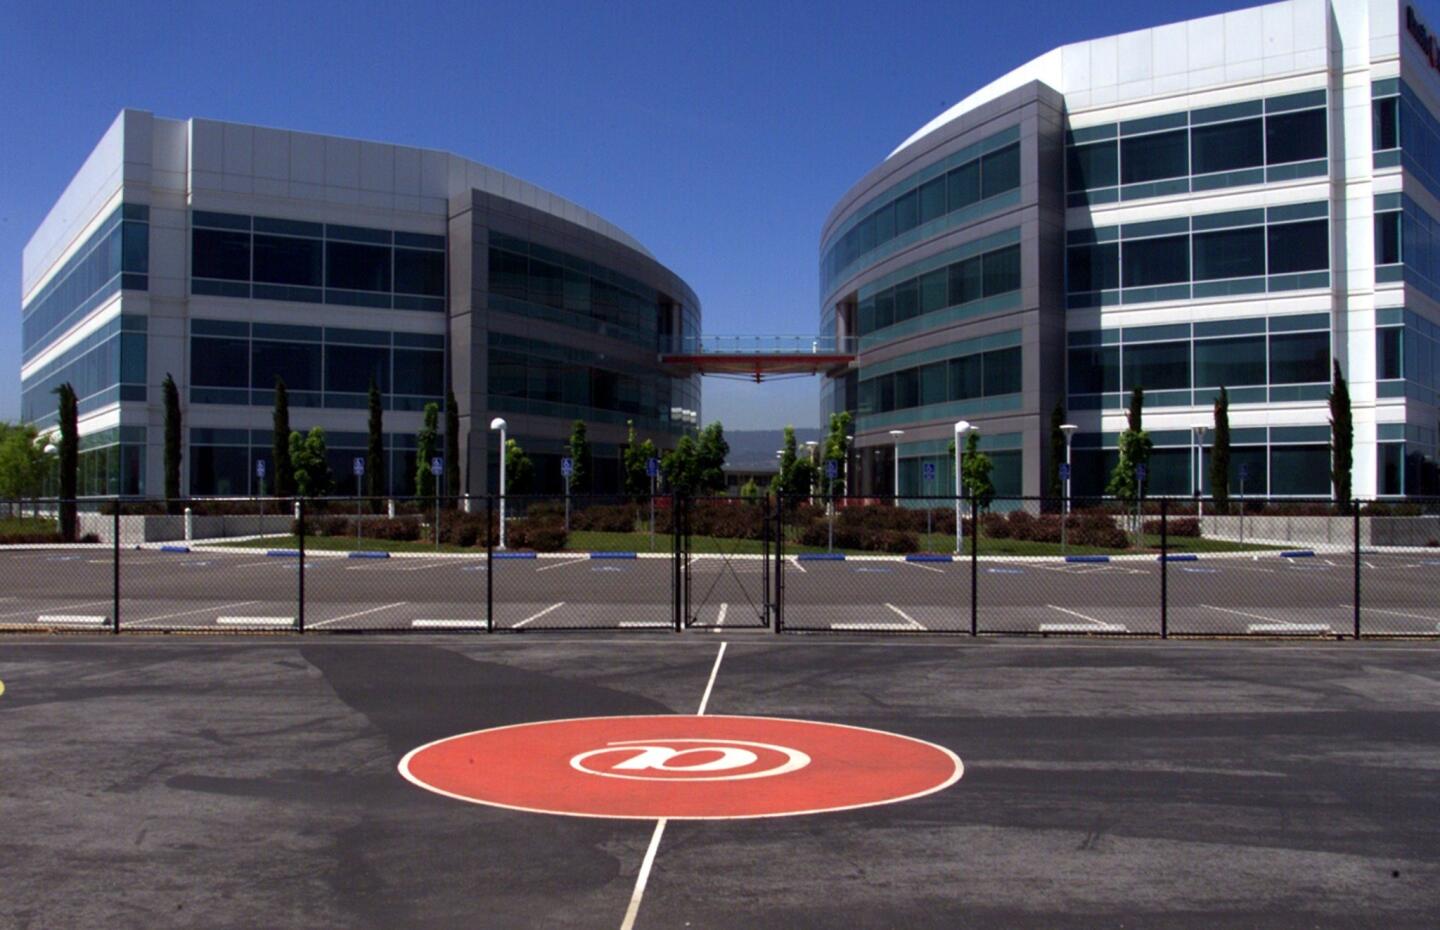 An employee basketball court and building sit vacant in Redwood City, part of the heart of Silicon Valley. The building used to house Excite, a dot-com company.